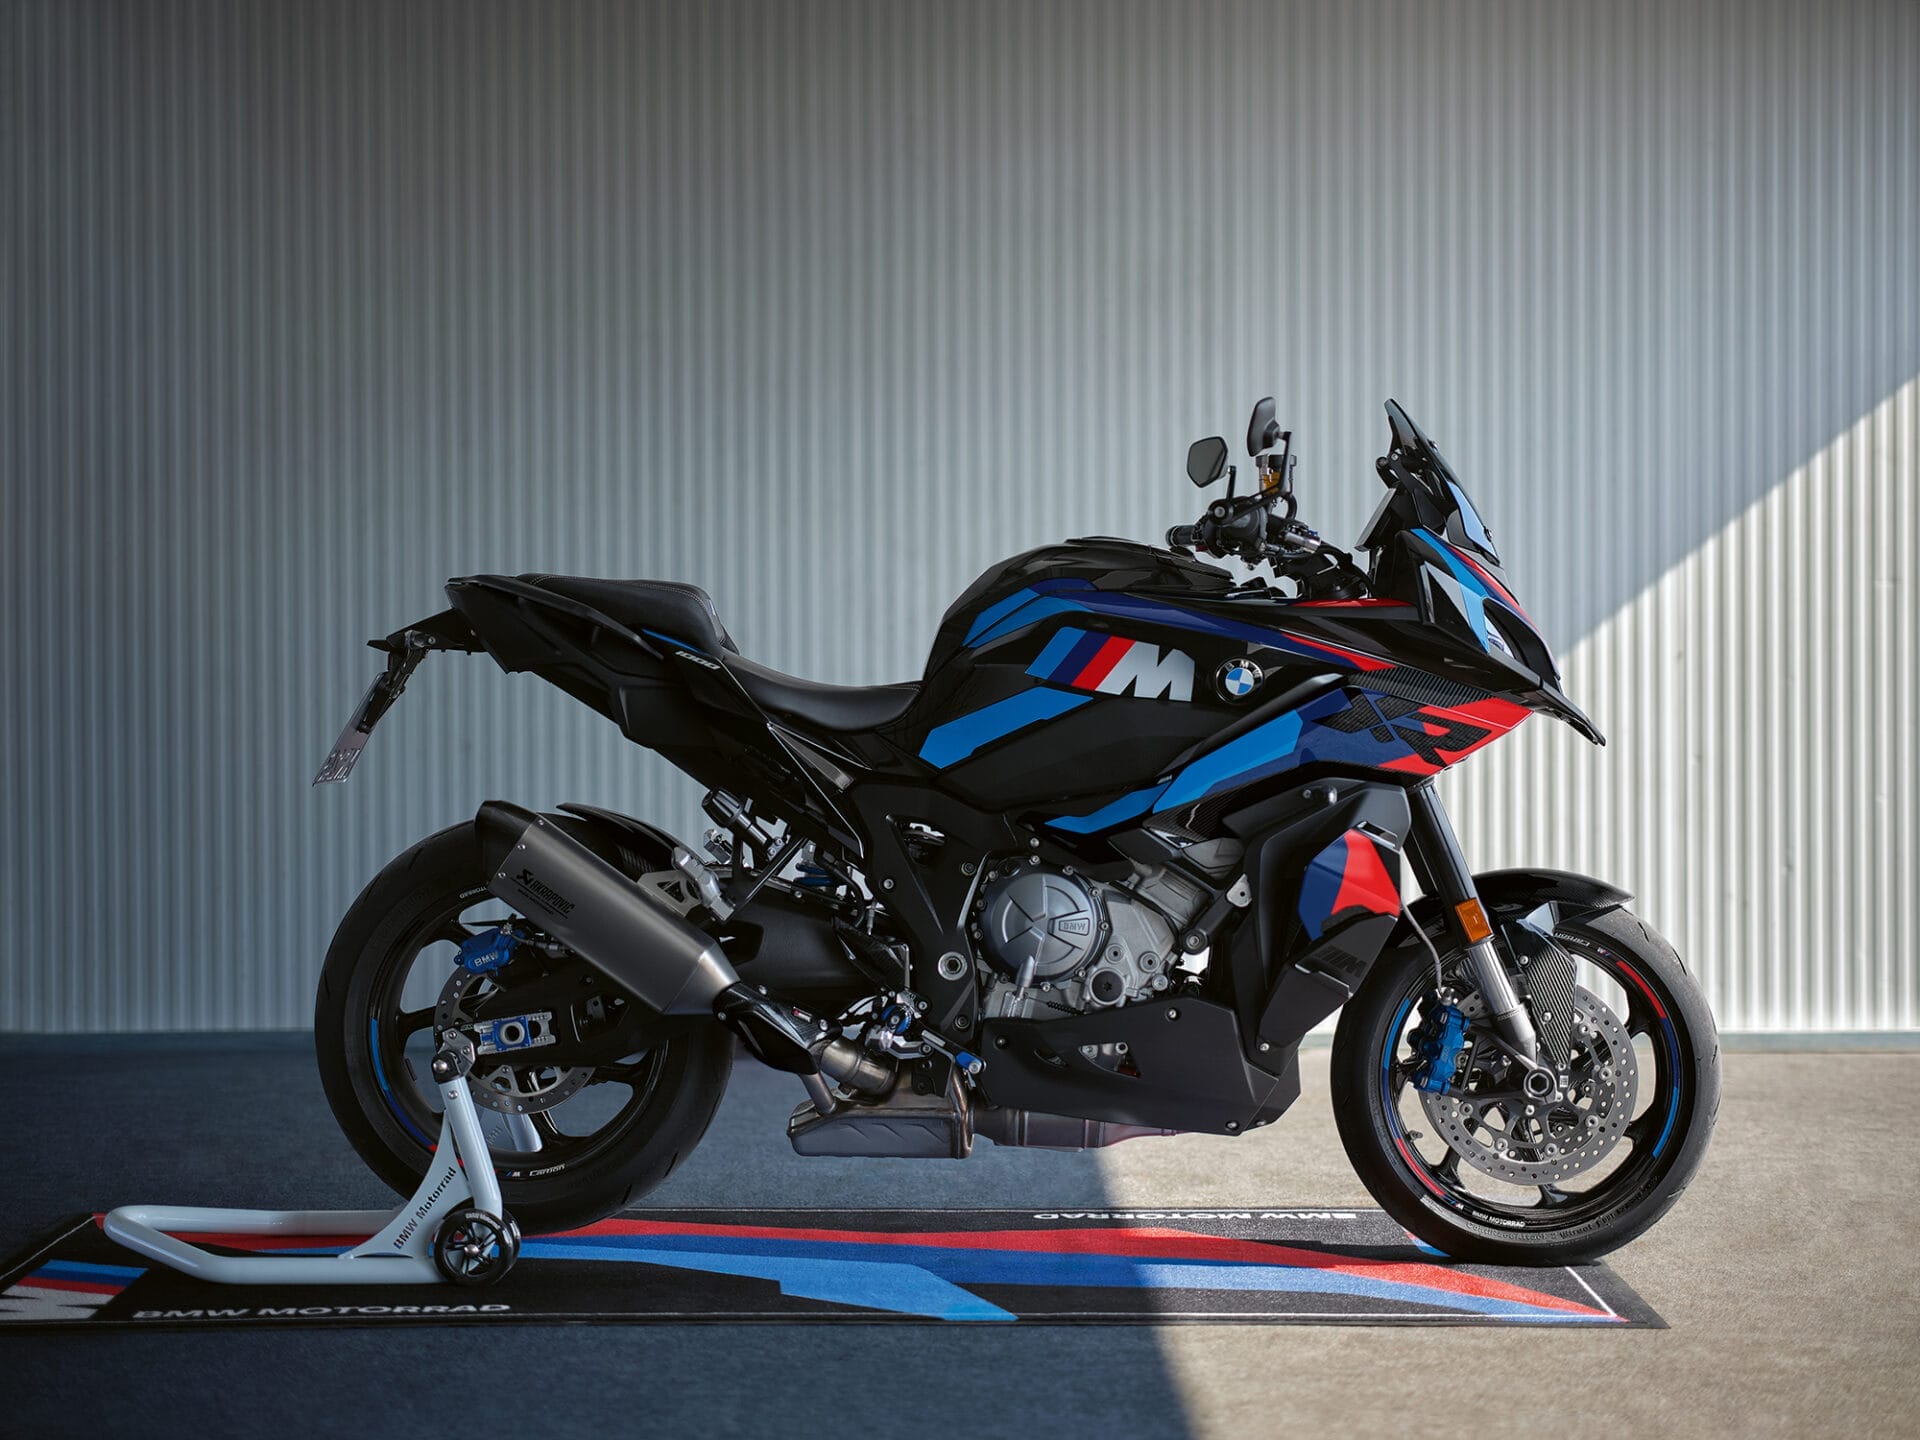 BMW M 1000 XR – New edition of the motorcycle dream